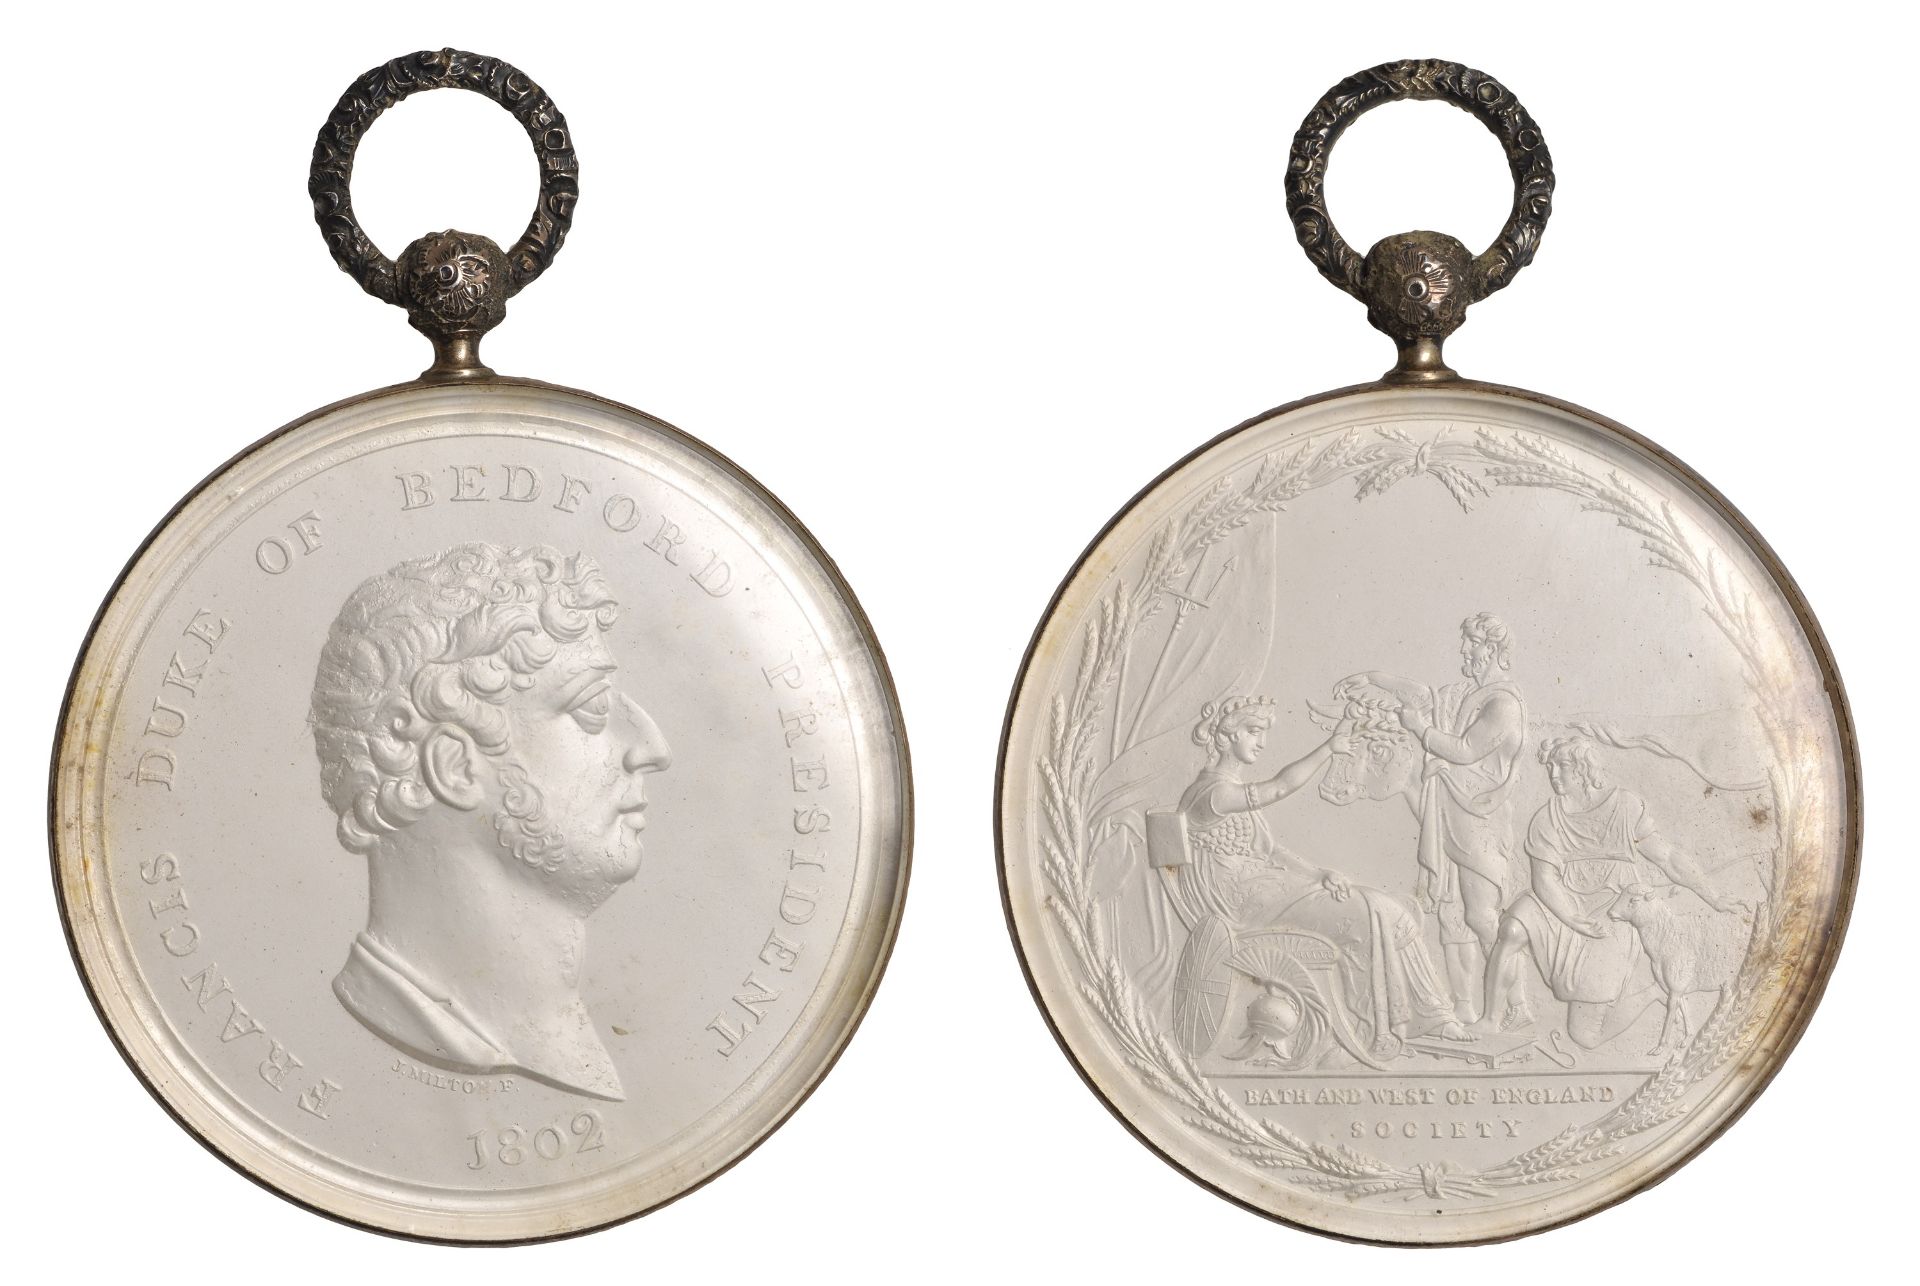 Bath and West of England Society, a glazed silver medal by J. Milton, bust of the Duke of Be...